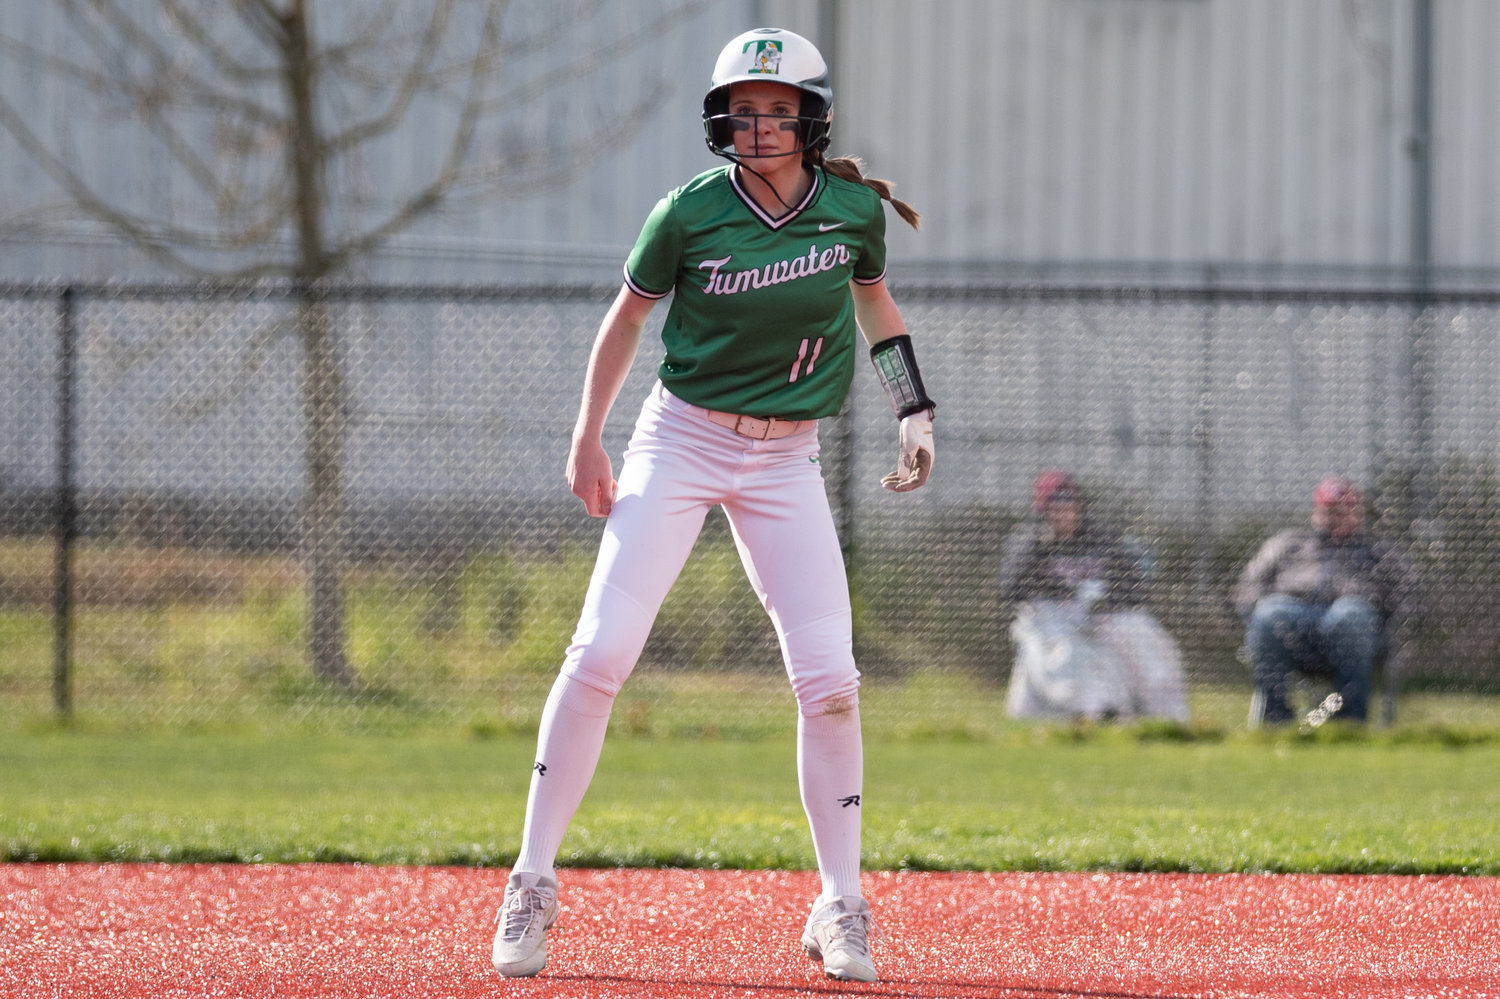 Tumwater's Kylie Waltermeyer navigates the basepath against W.F. West at Recreation Park in Chehalis April 15.